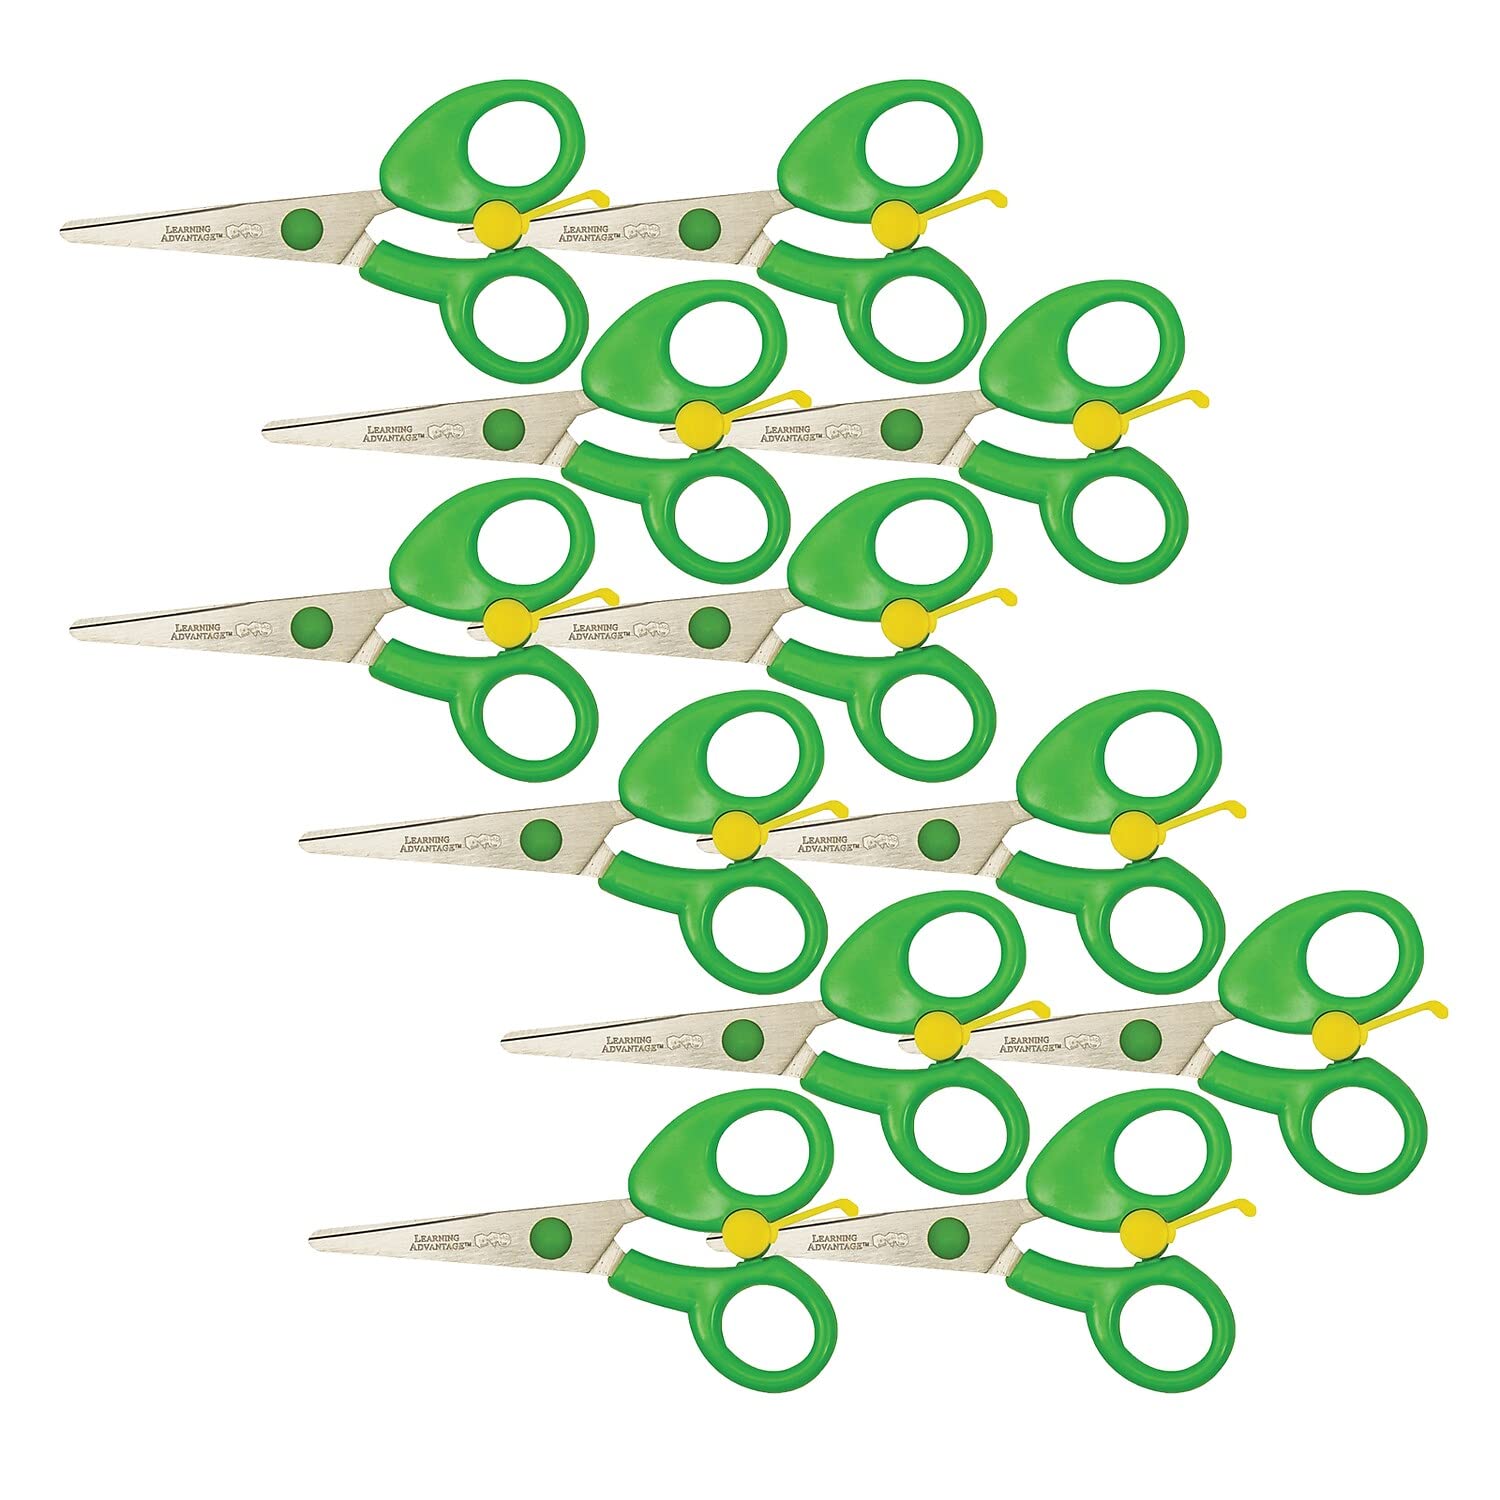 Learning Advantage Special Needs Scissors